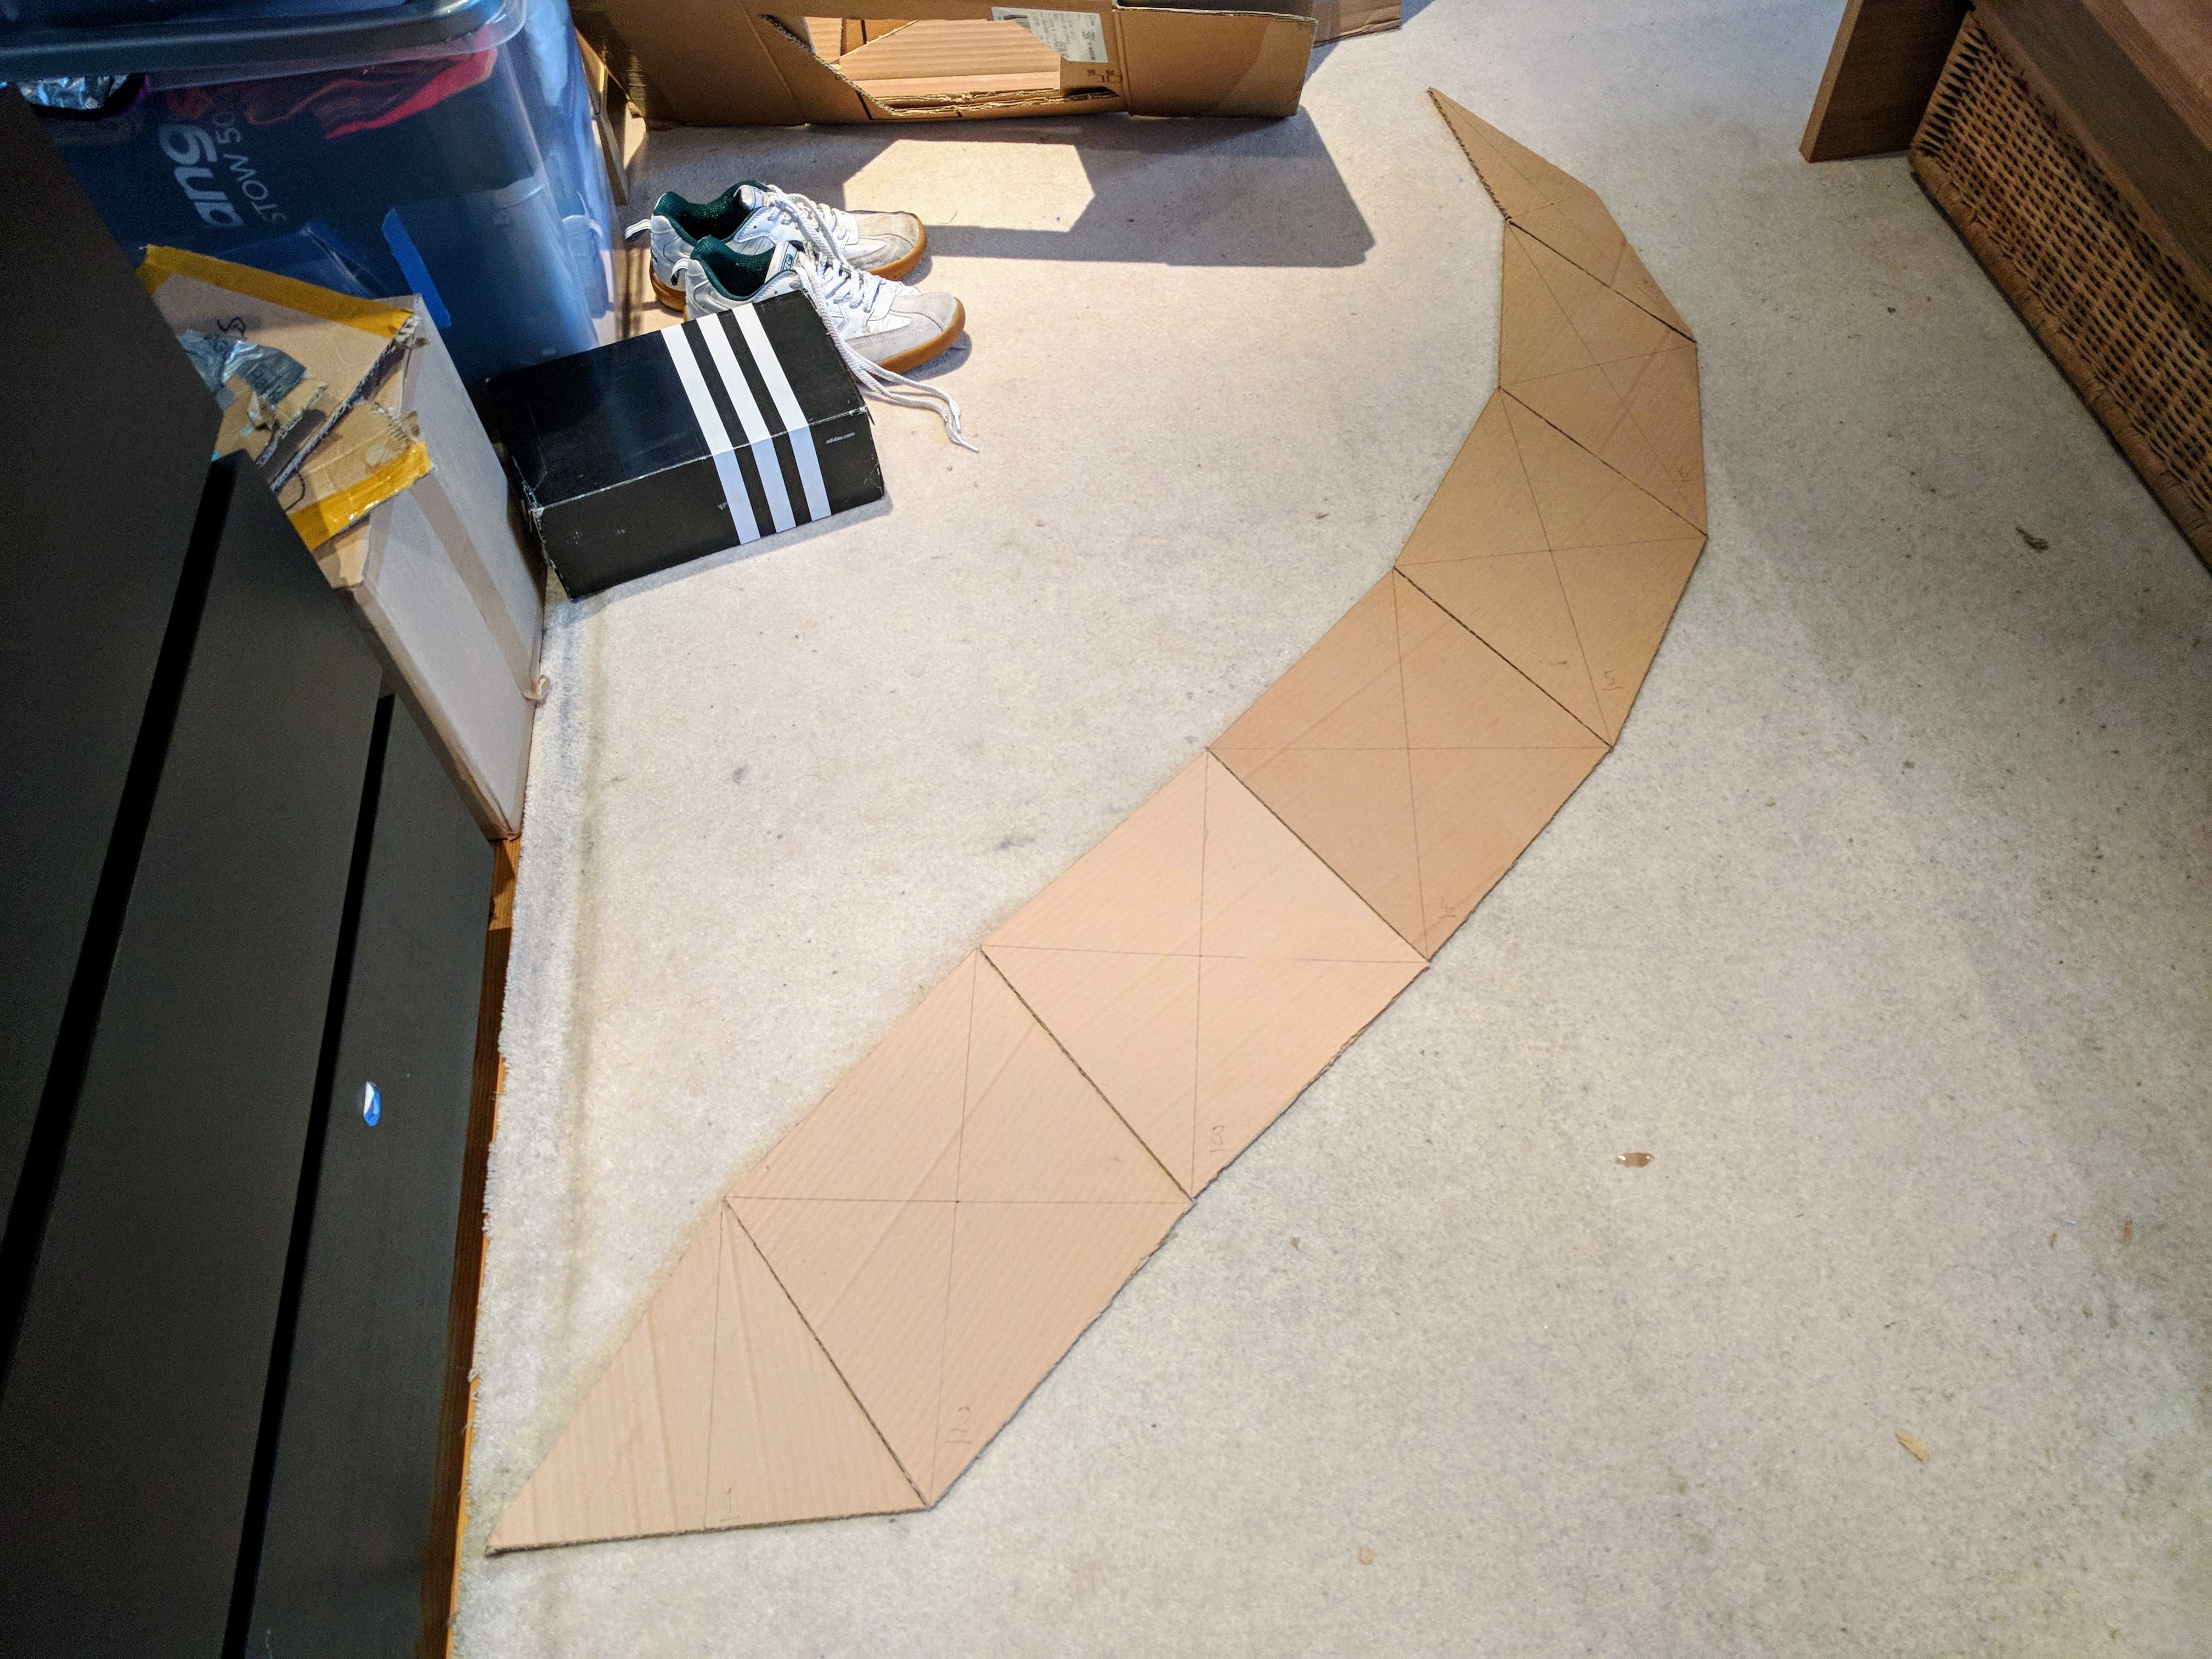 Building a 1.4m high polar zonohedron dome ('zome') on Saturday. First strip cut out of cardboard.